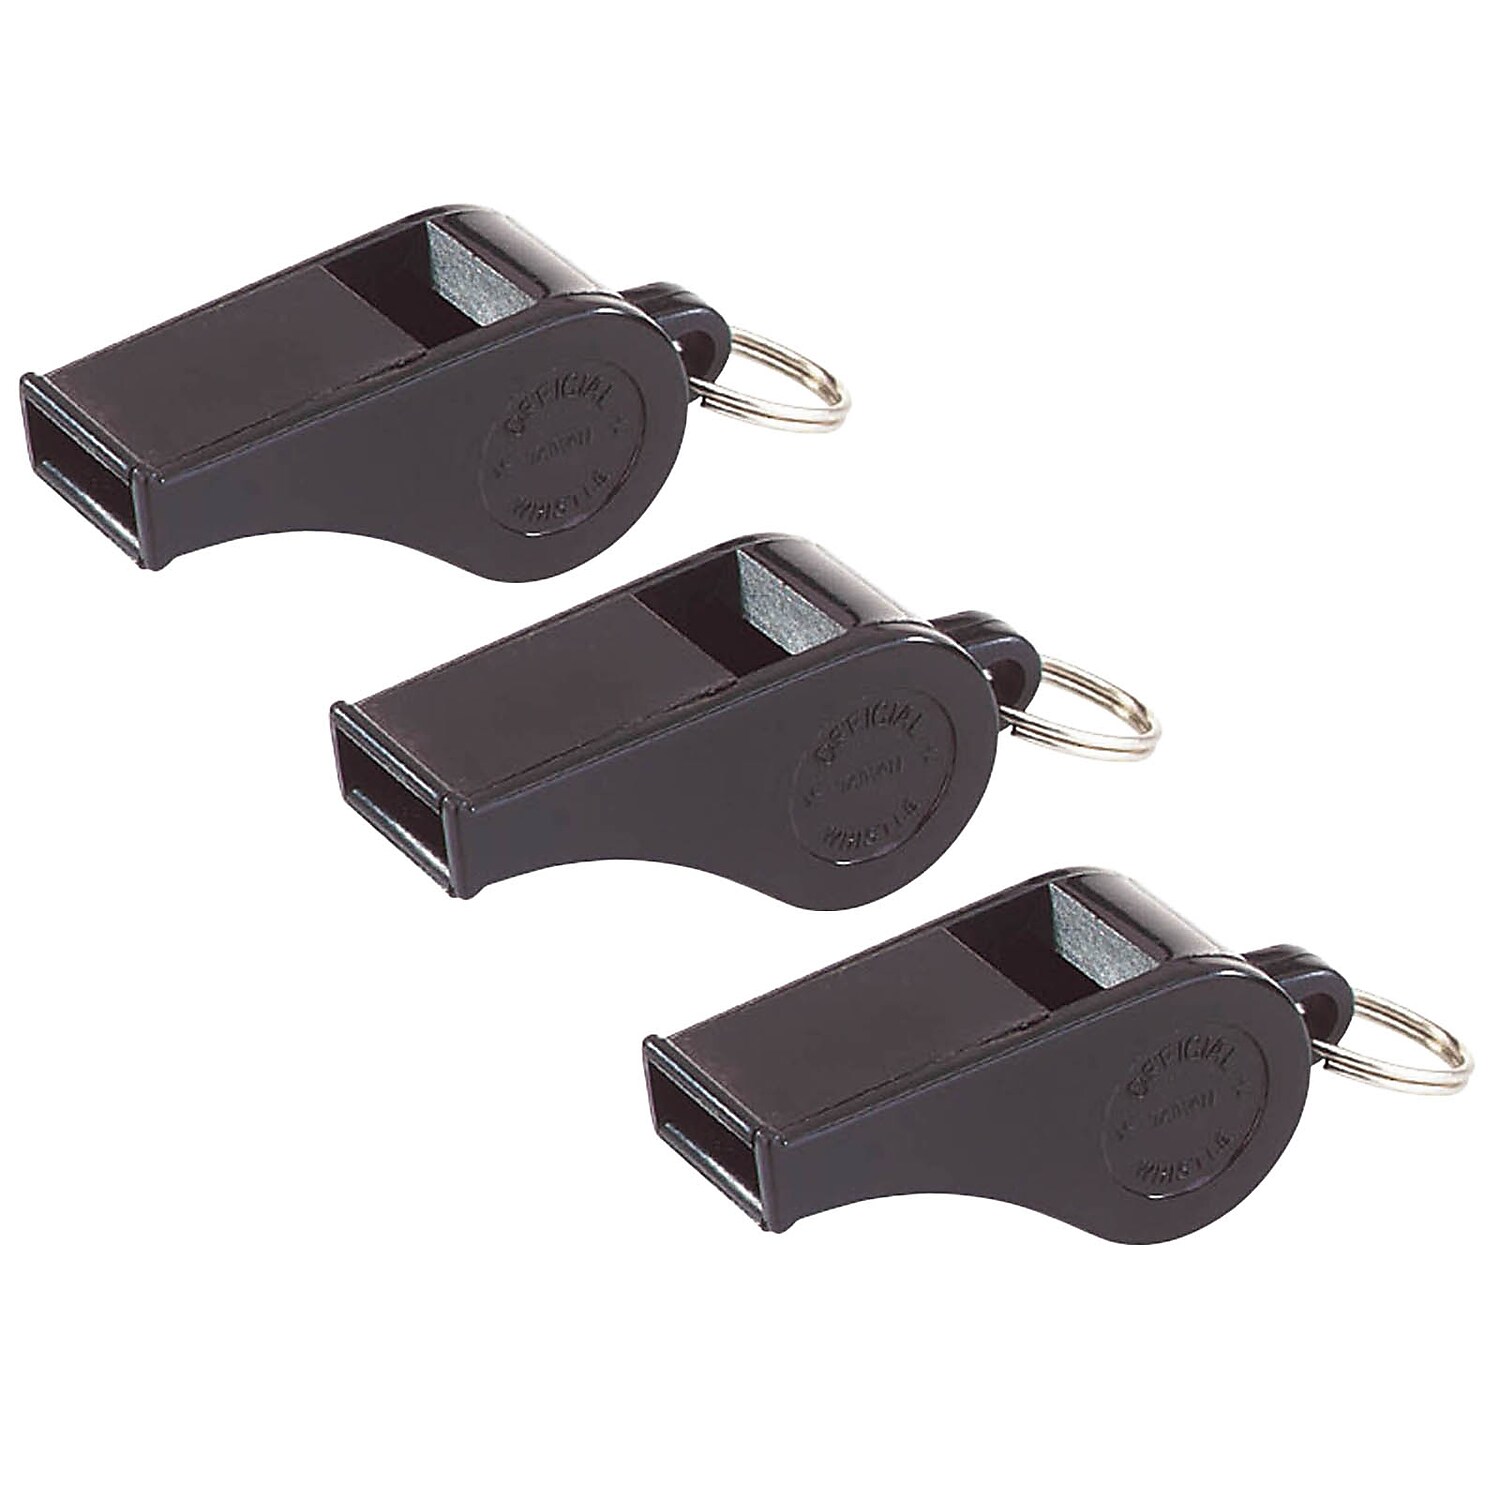 Dick Martin Sports MASP20-3 1.75 in. Whistle Small Plastic, Black - 12 Per Pack - Pack of 3 - image 1 of 2